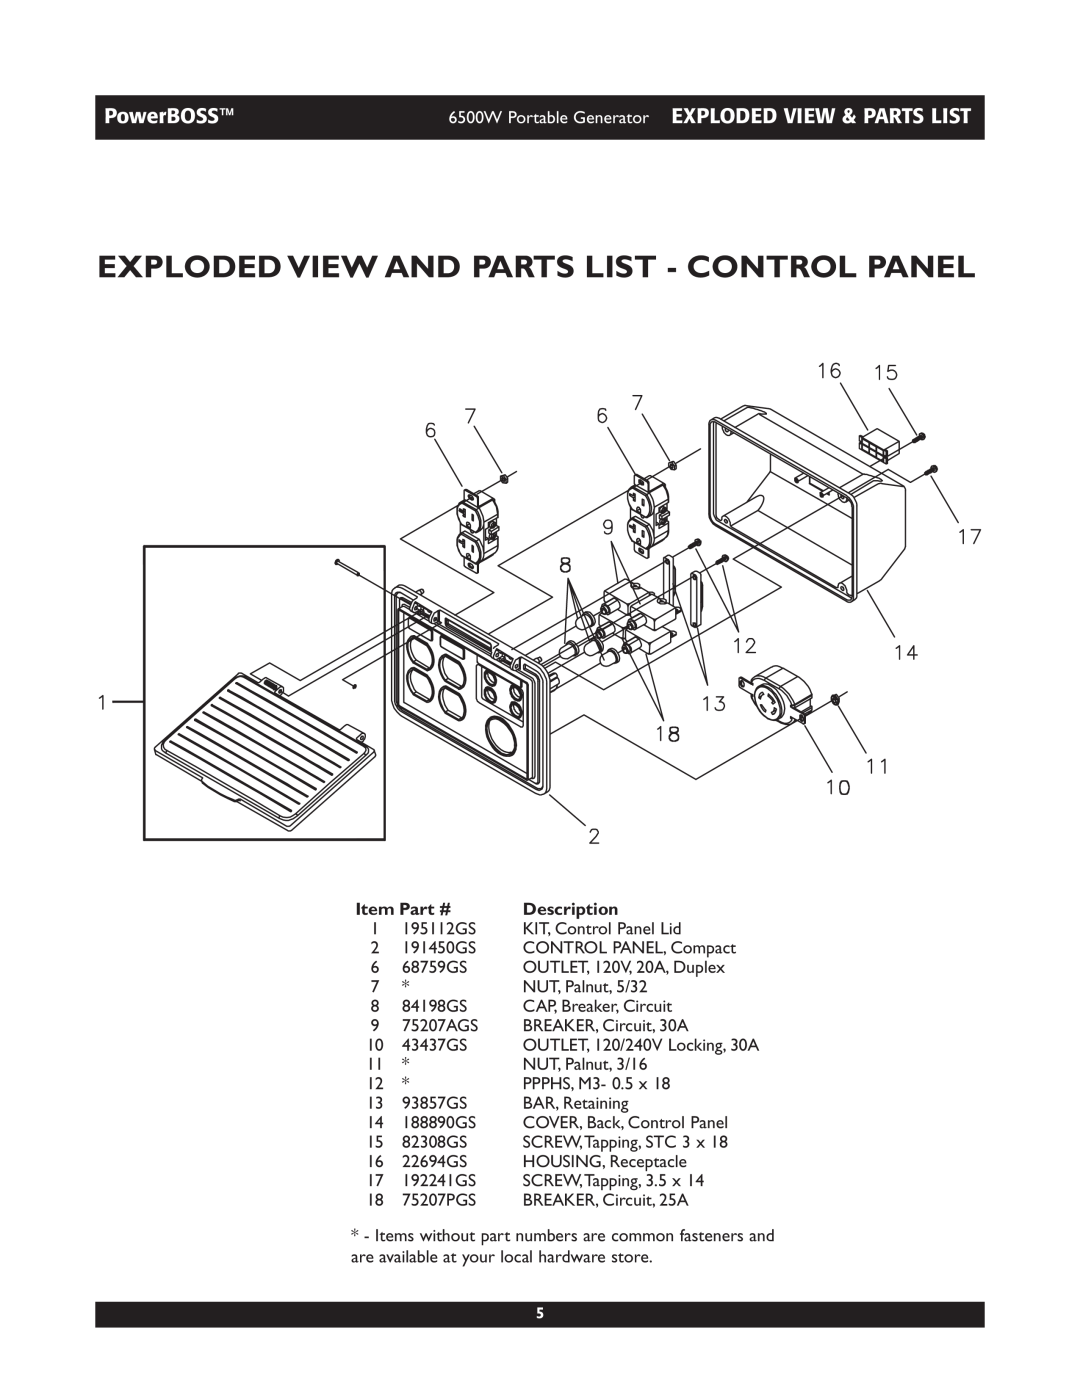 Briggs & Stratton 030227 manual Exploded View And Parts List - Control Panel, PowerBOSS, Description 